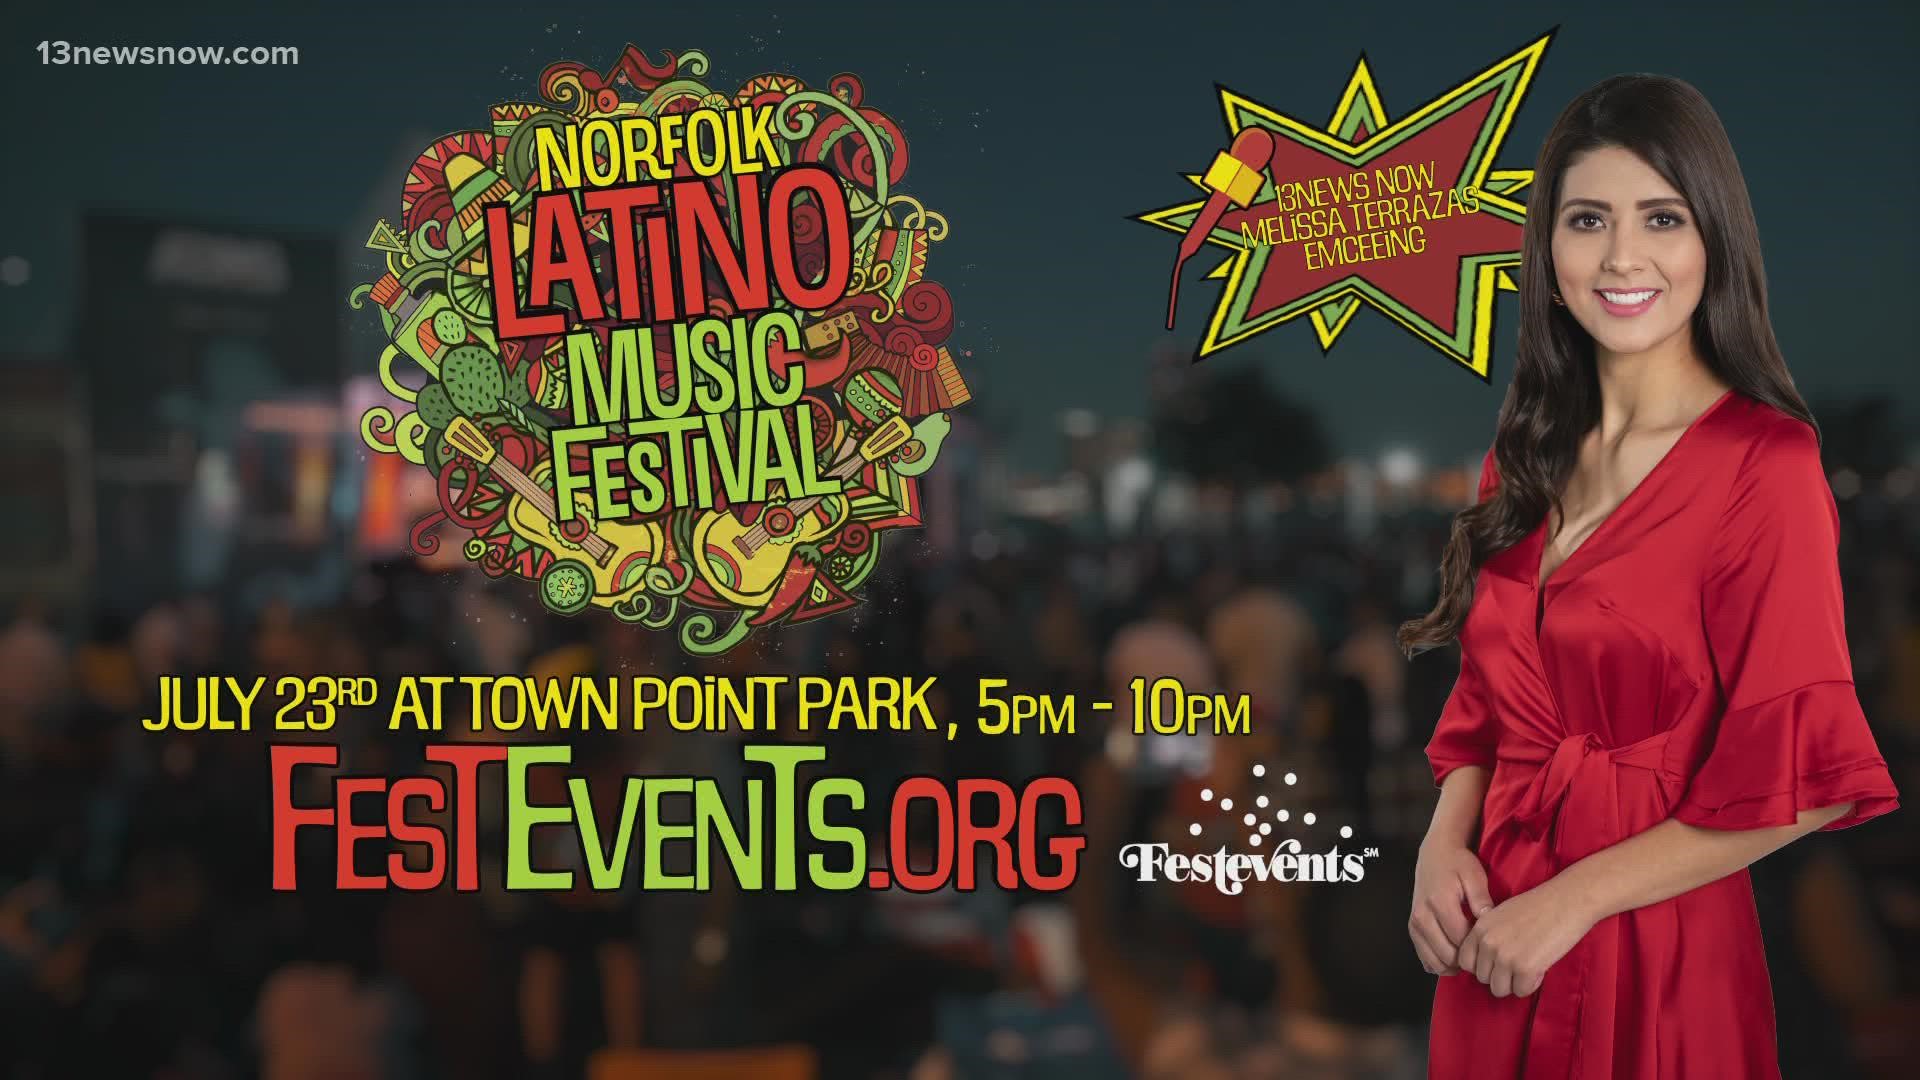 If you love good food or salsa dancing, there's an event coming up in Norfolk that you're really going to love!